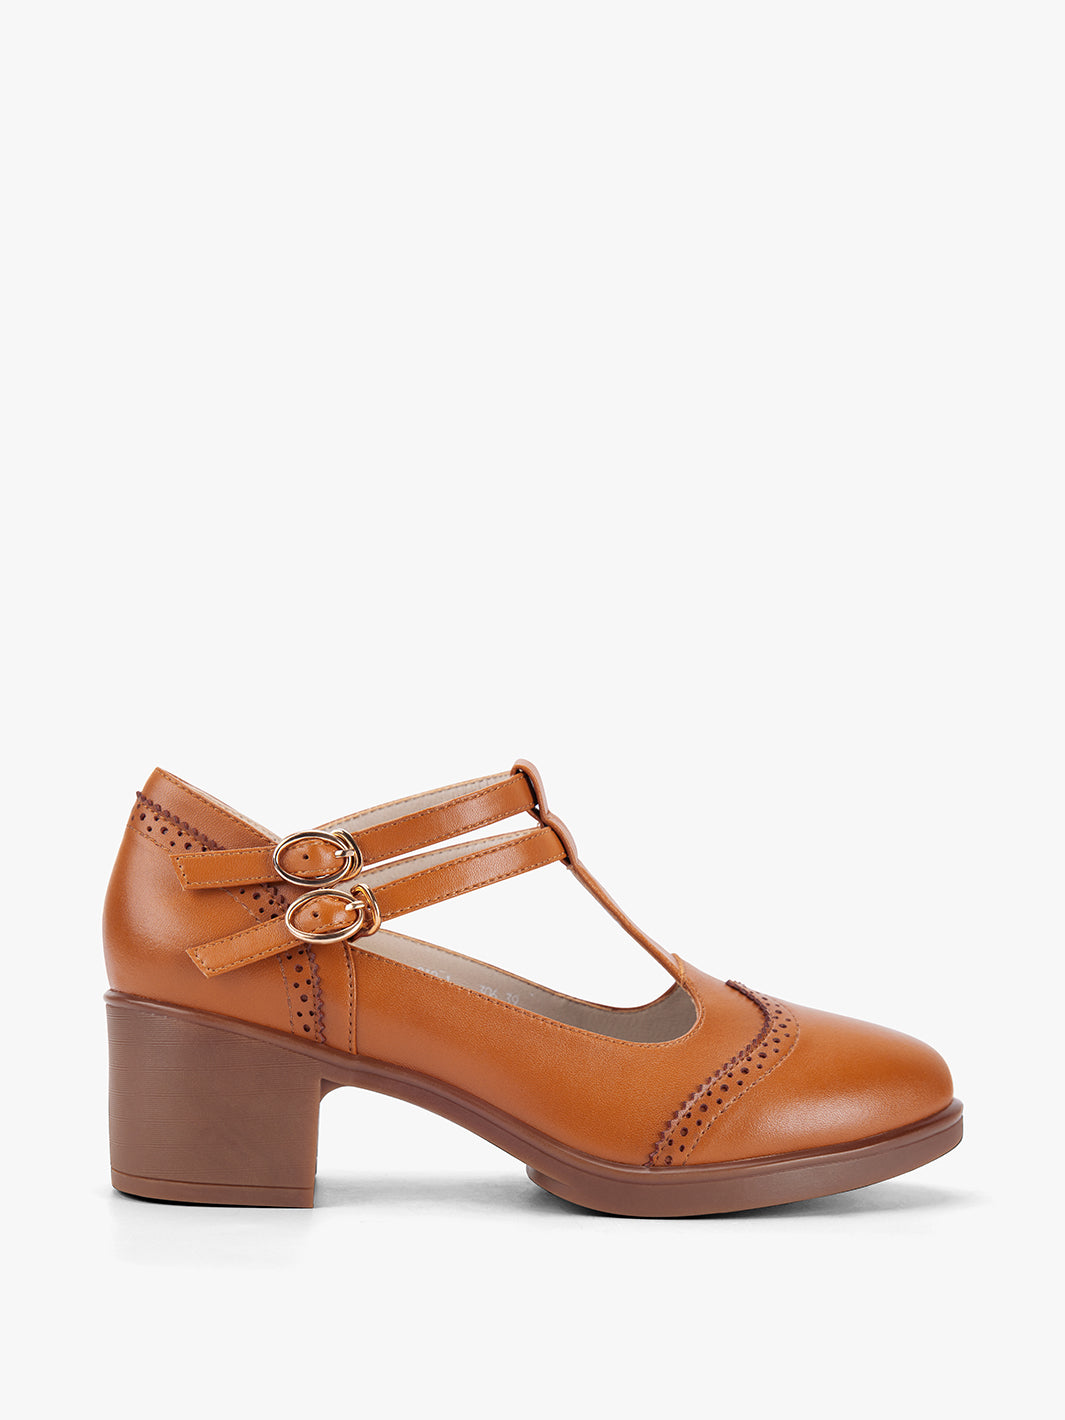 Women's Classic T-Strap Leather Shoes